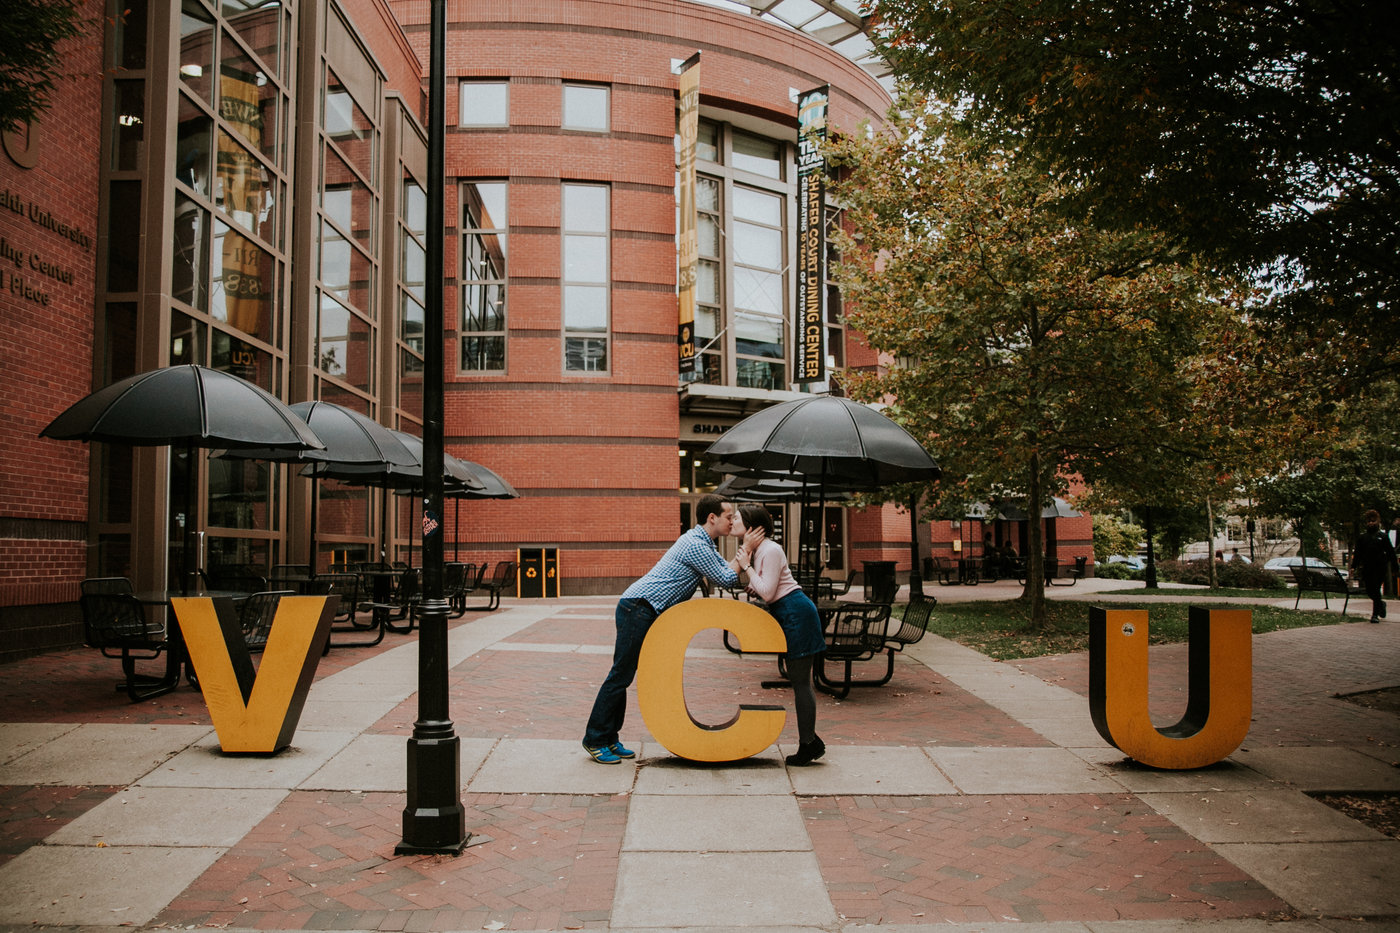 Two people kissing over large V C U letters.